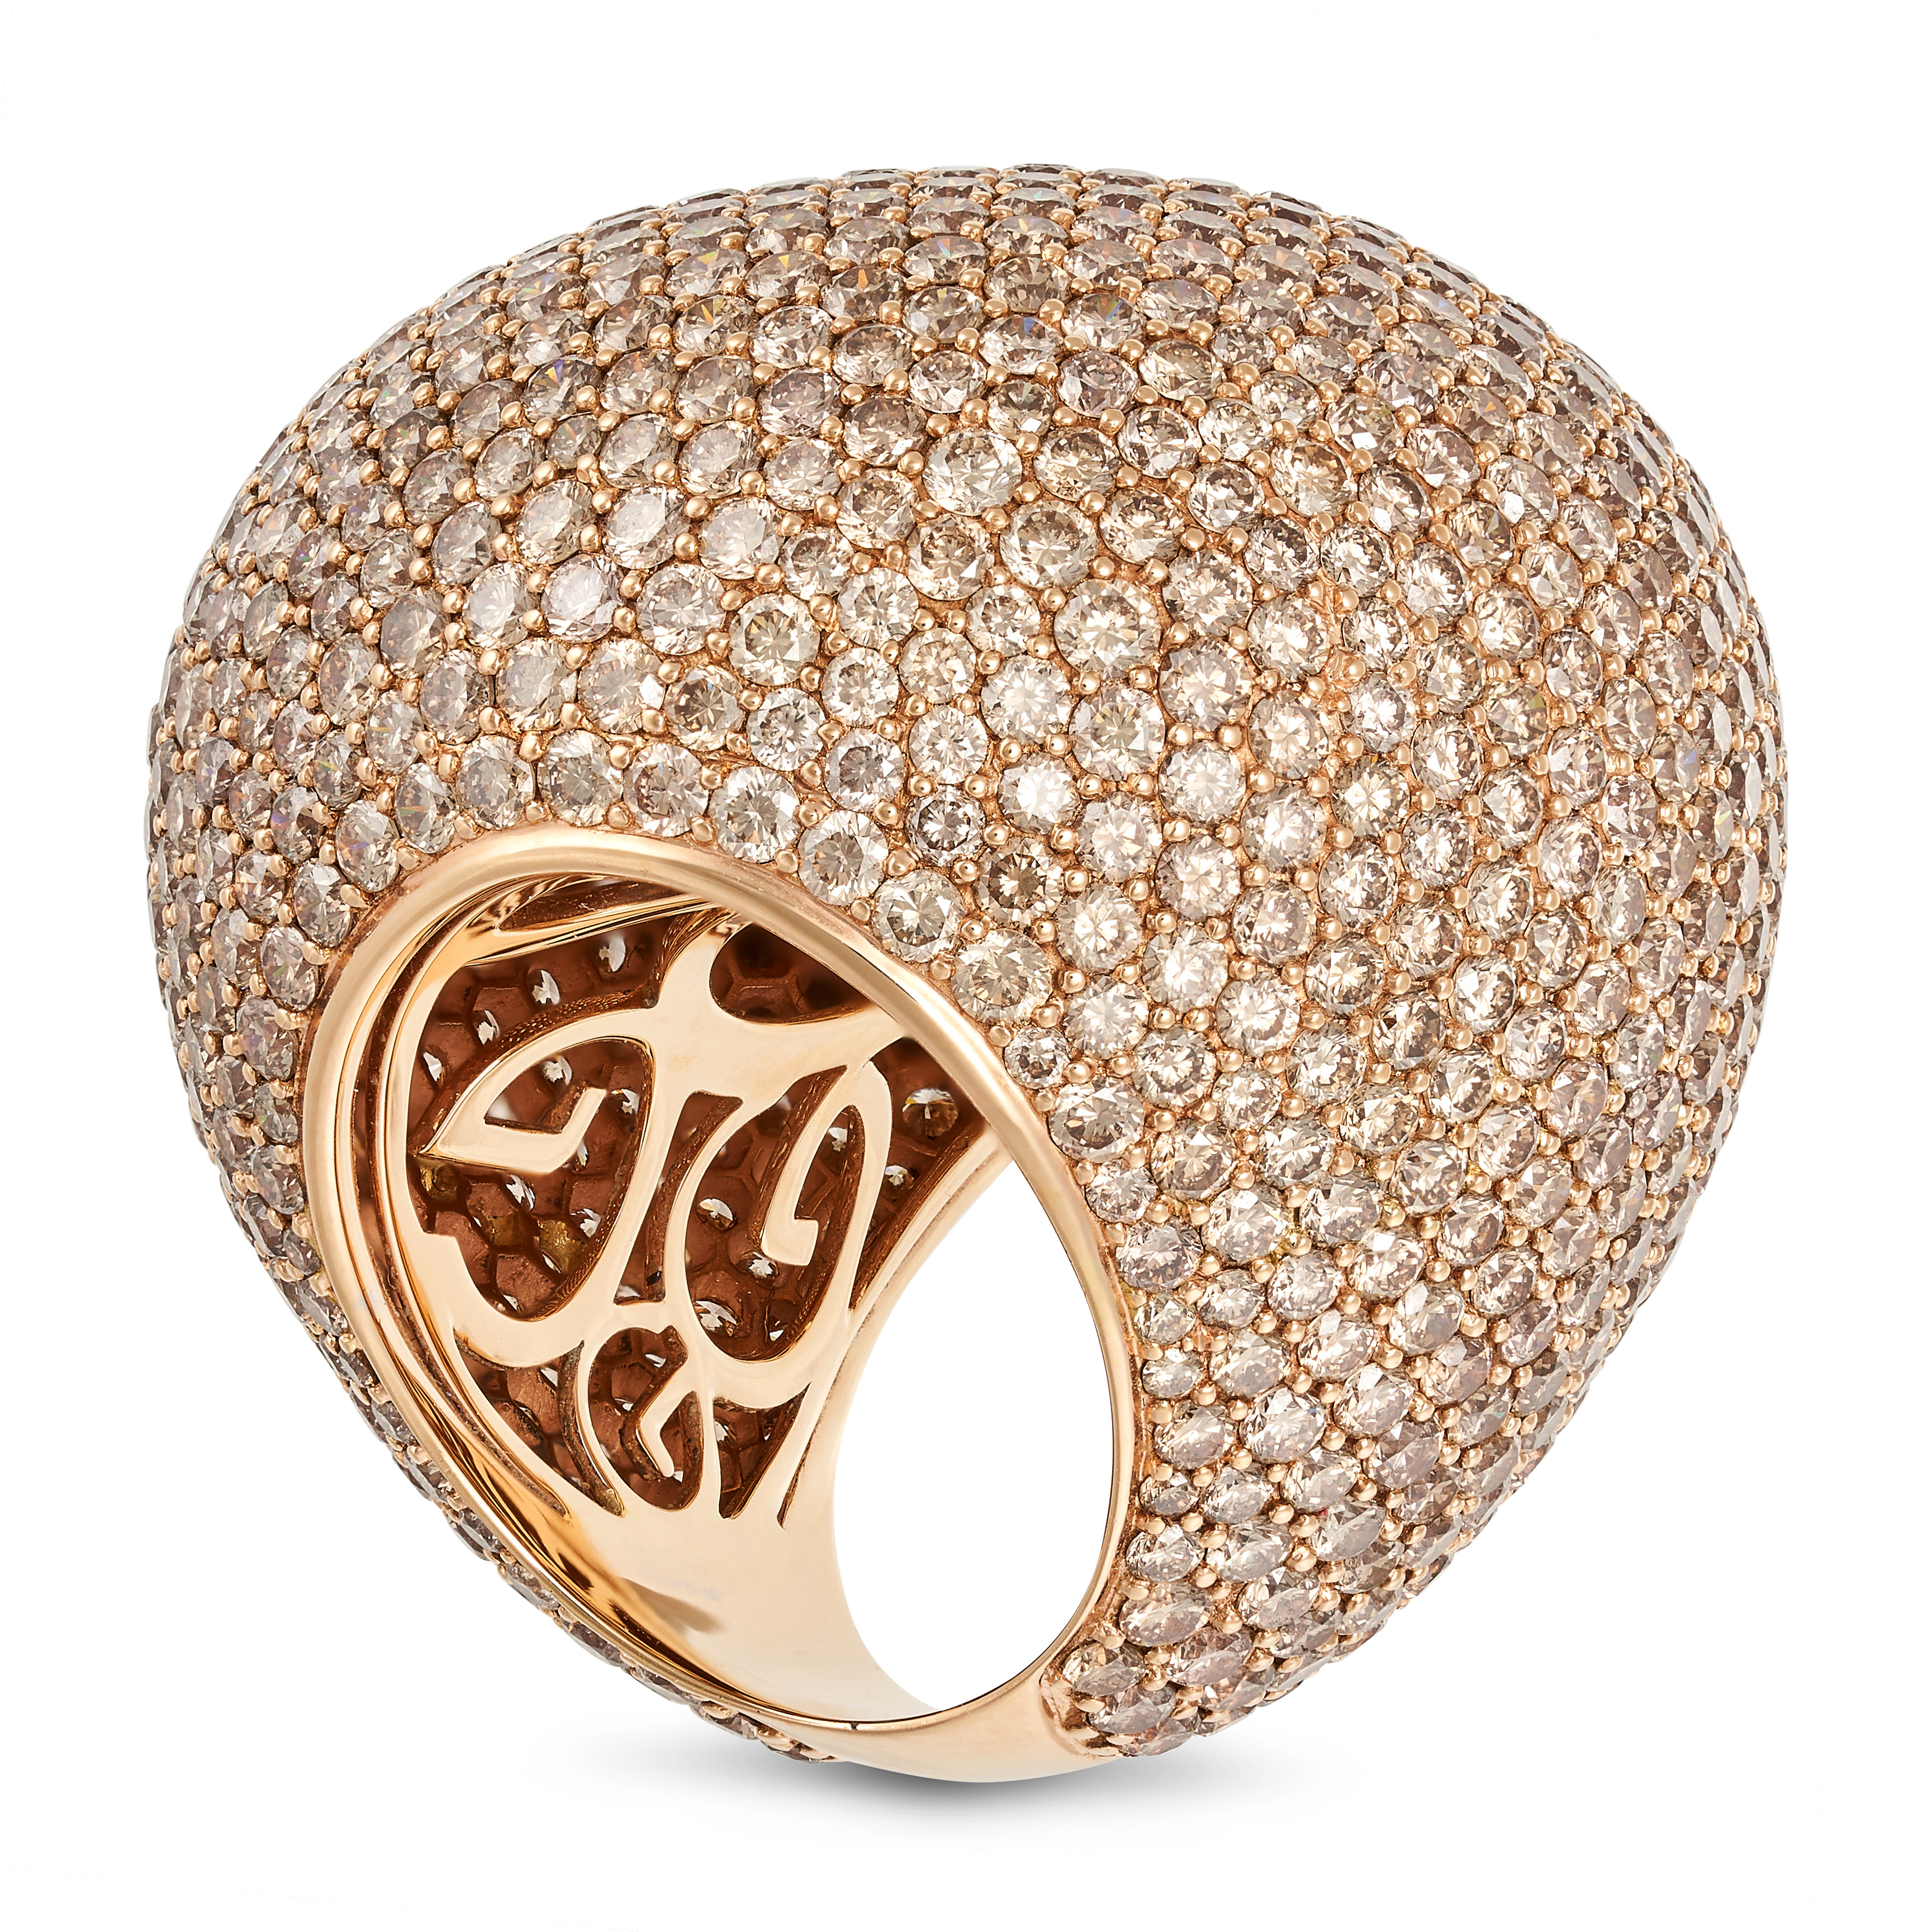 A DIAMOND BOMBE DRESS RING in 18ct yellow gold, set throughout with round brilliant cut brown dia... - Image 2 of 2